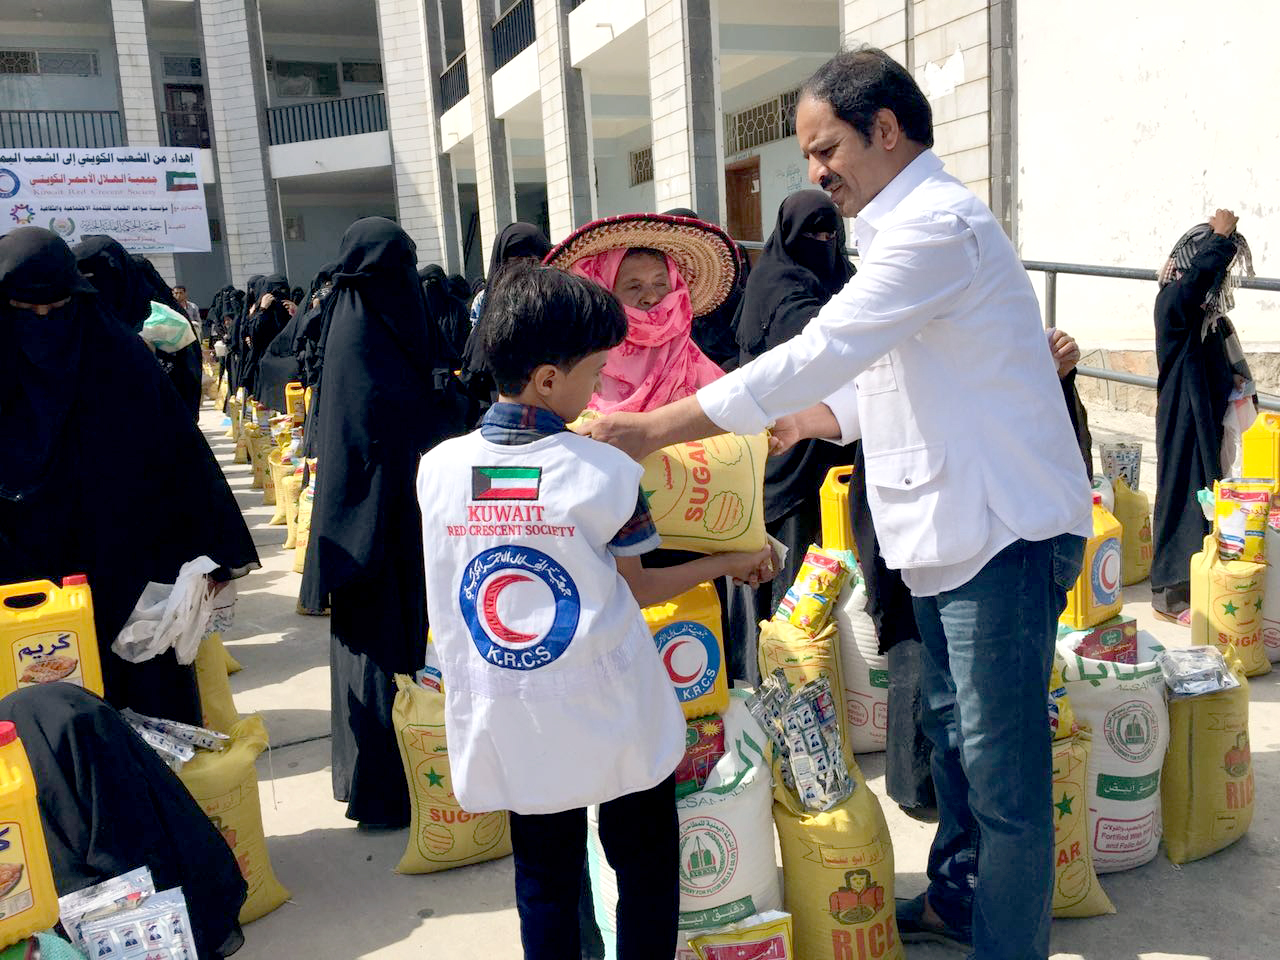 KRCS continues aid delivery in Taiz, Yemen